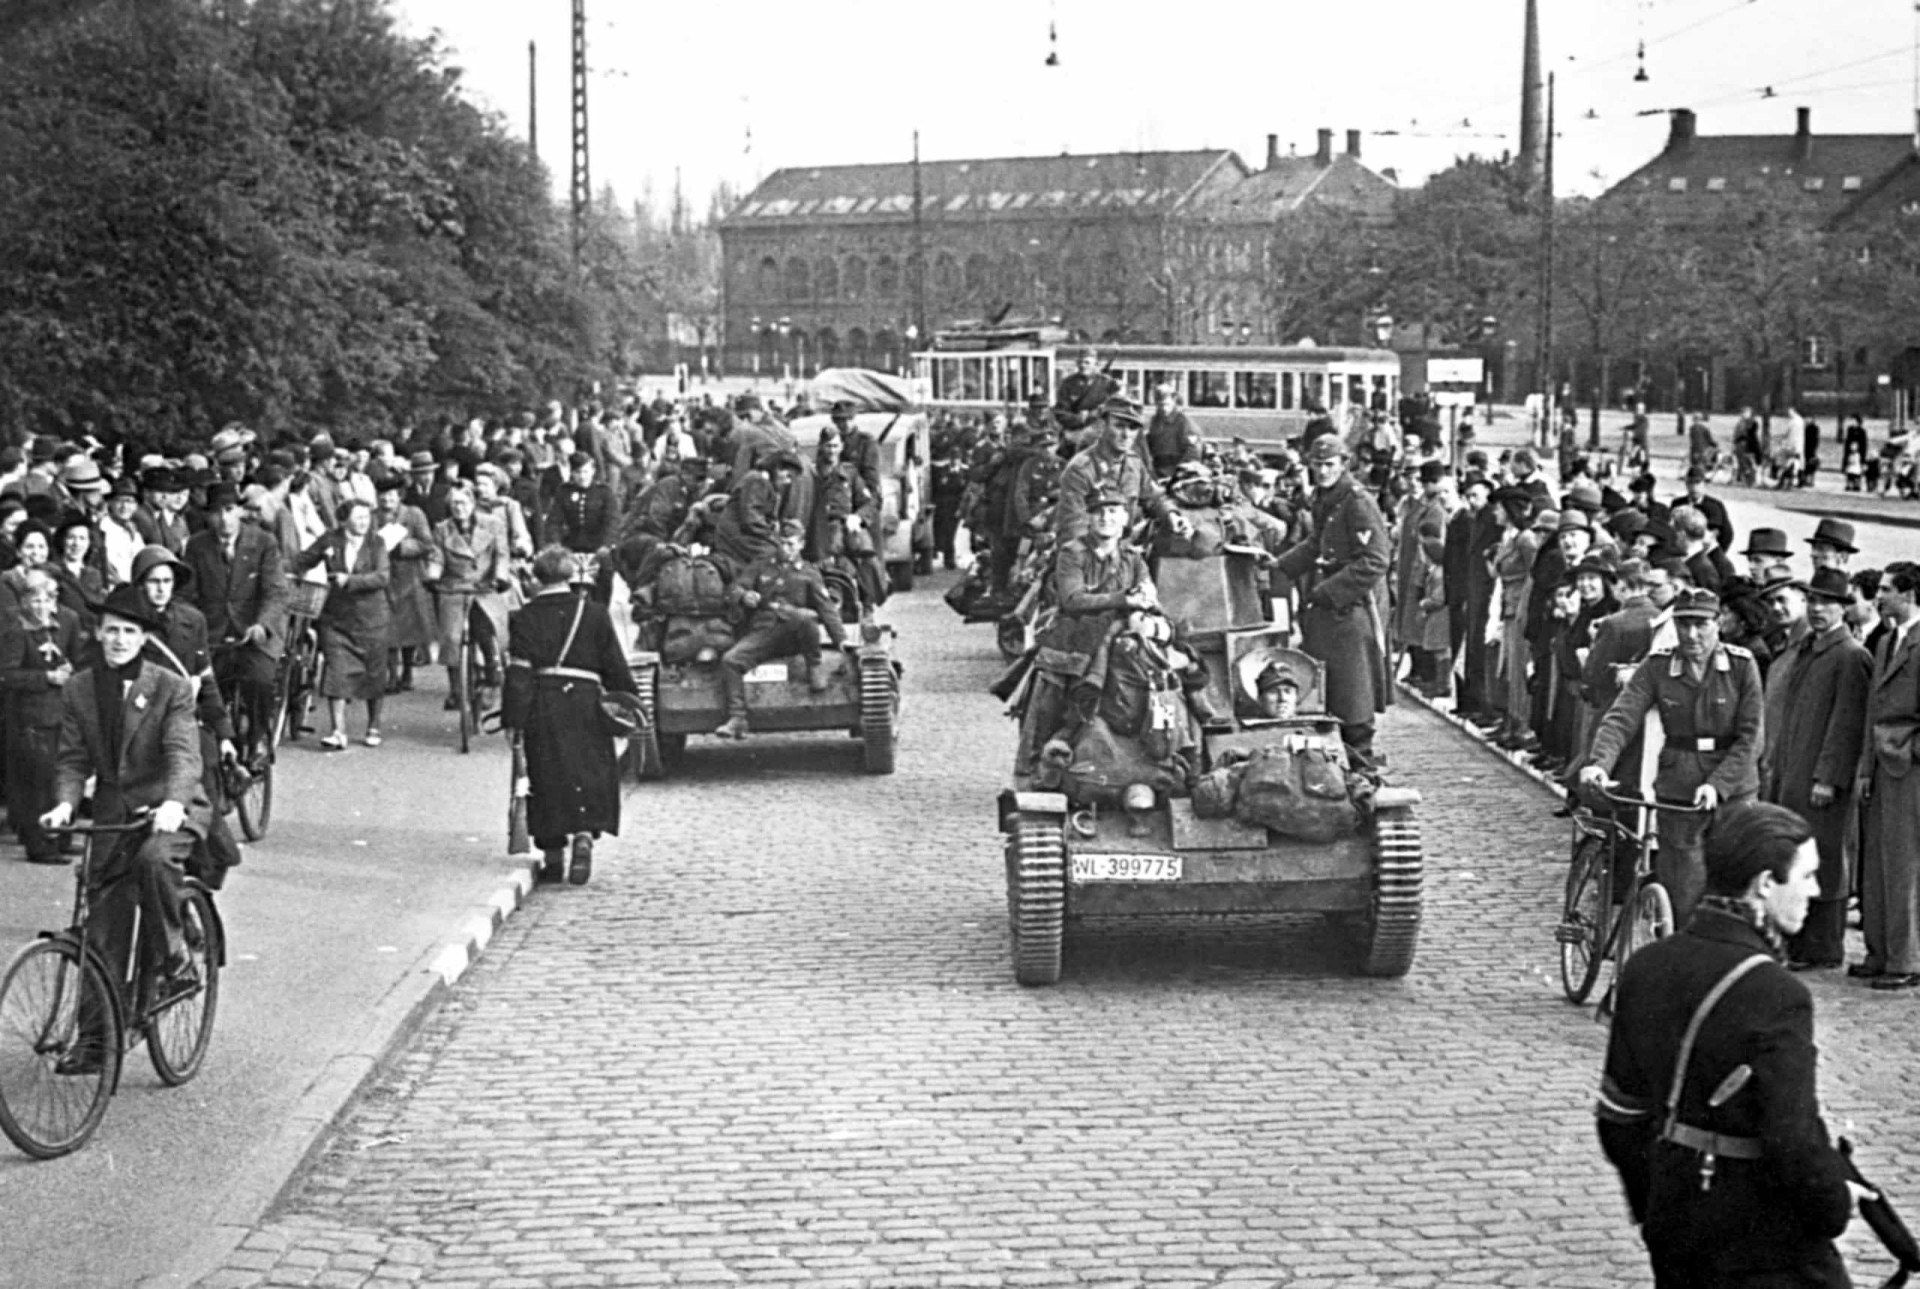 <p>The Danish resistance monitors the streets as the German Army's motorized units exit Denmark following Germany's surrender in May 1945. A crowd of thrilled citizens observe their departure.</p><p><a href="https://www.msn.com/en-my/community/channel/vid-7xx8mnucu55yw63we9va2gwr7uihbxwc68fxqp25x6tg4ftibpra?cvid=94631541bc0f4f89bfd59158d696ad7e">Follow us and access great exclusive content every day</a></p>